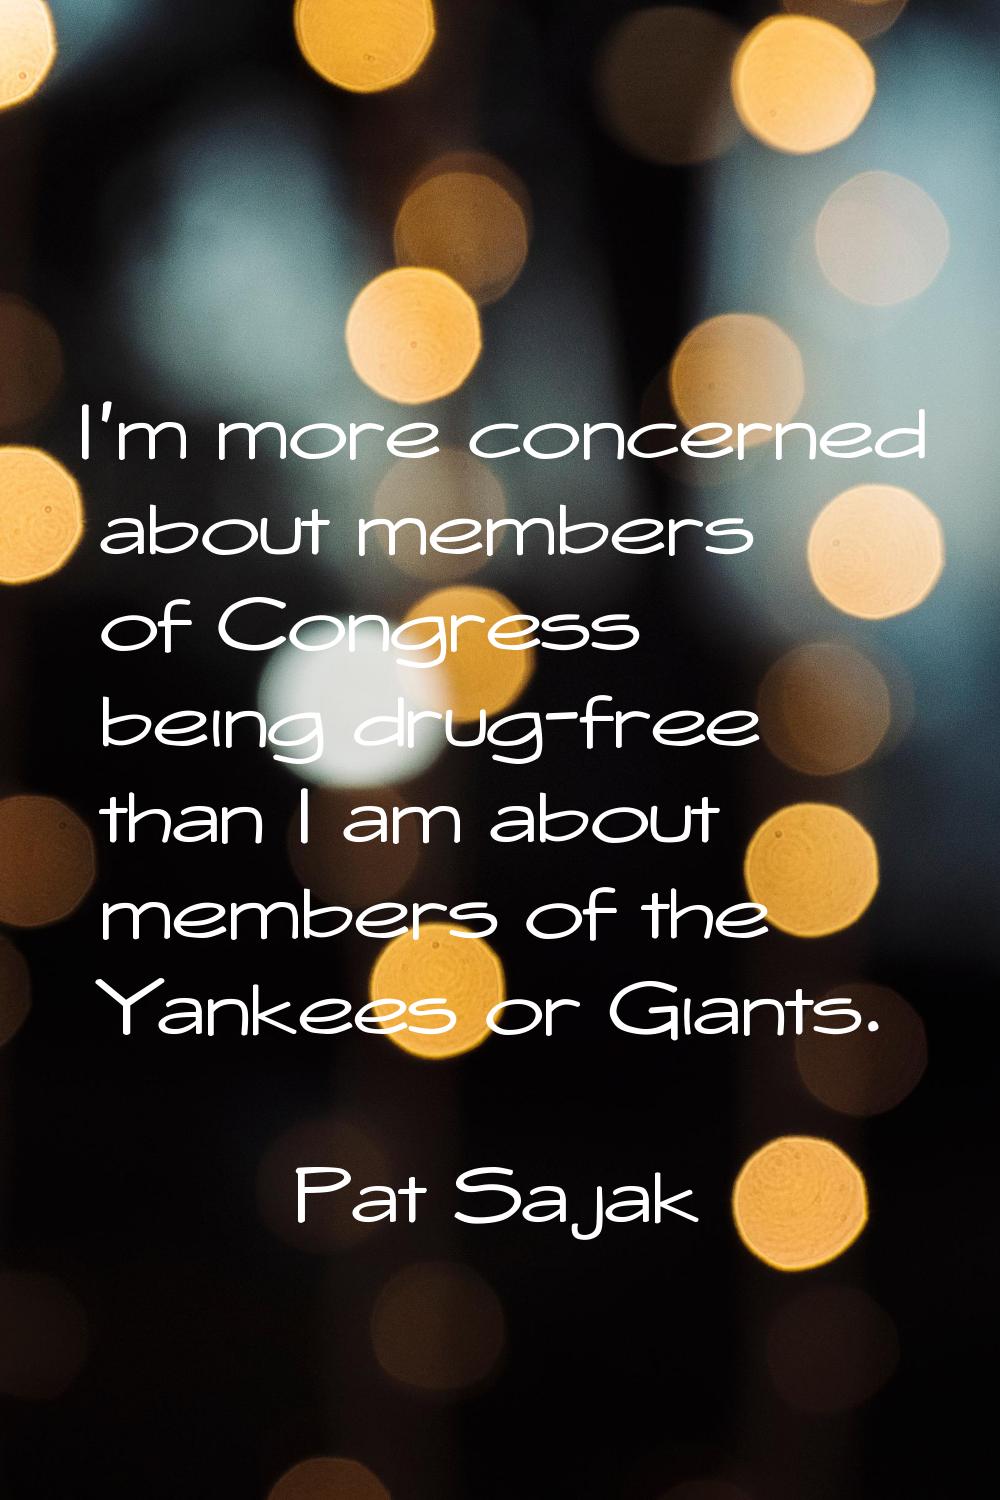 I'm more concerned about members of Congress being drug-free than I am about members of the Yankees